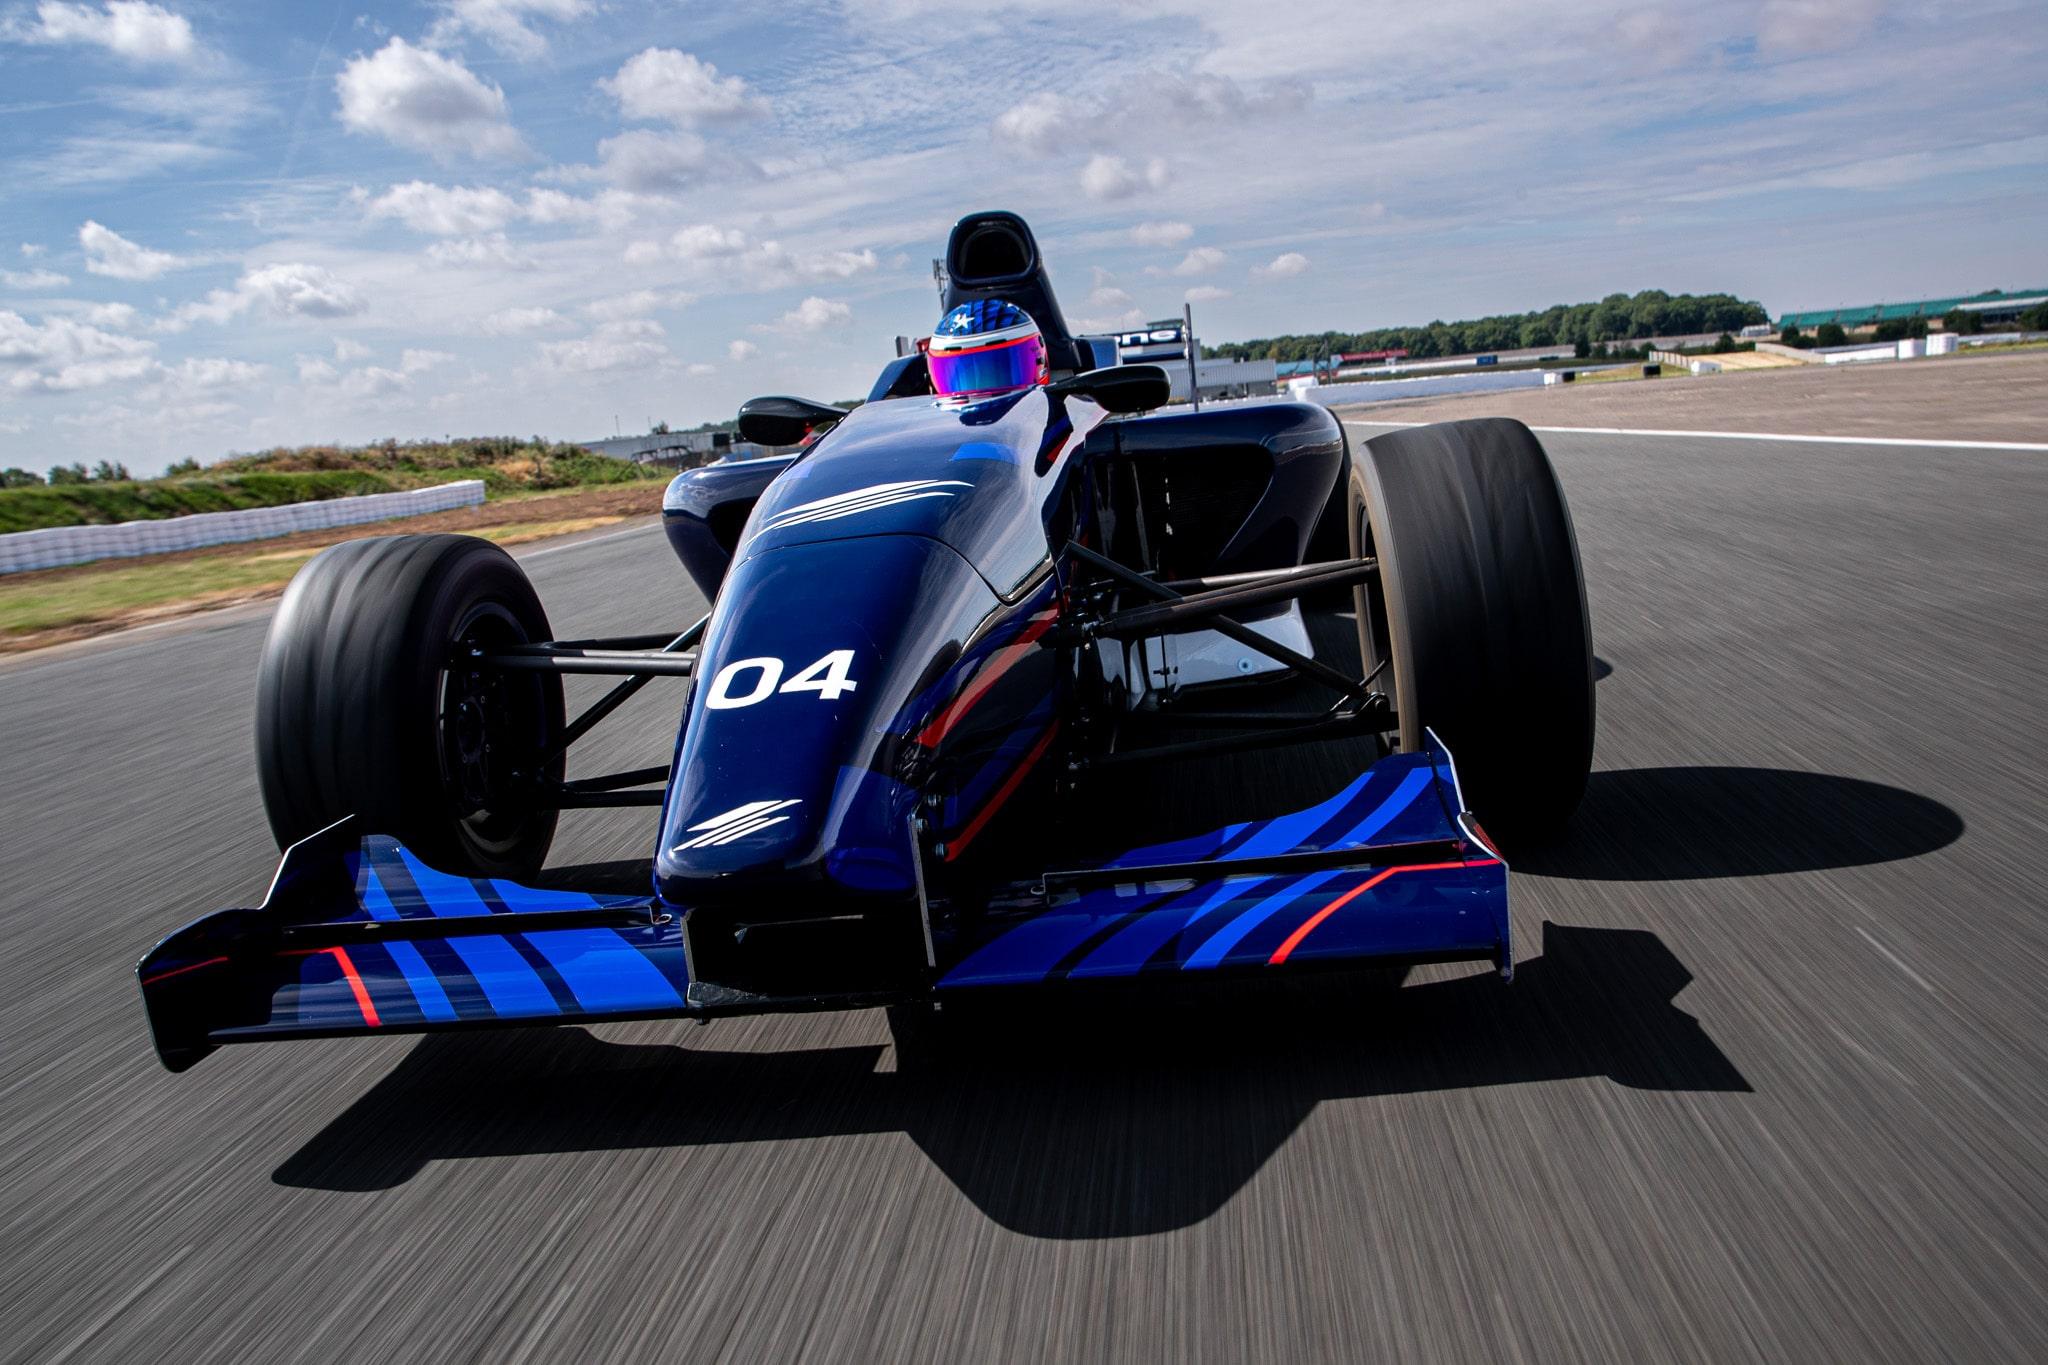 Single seater on track at Silverstone